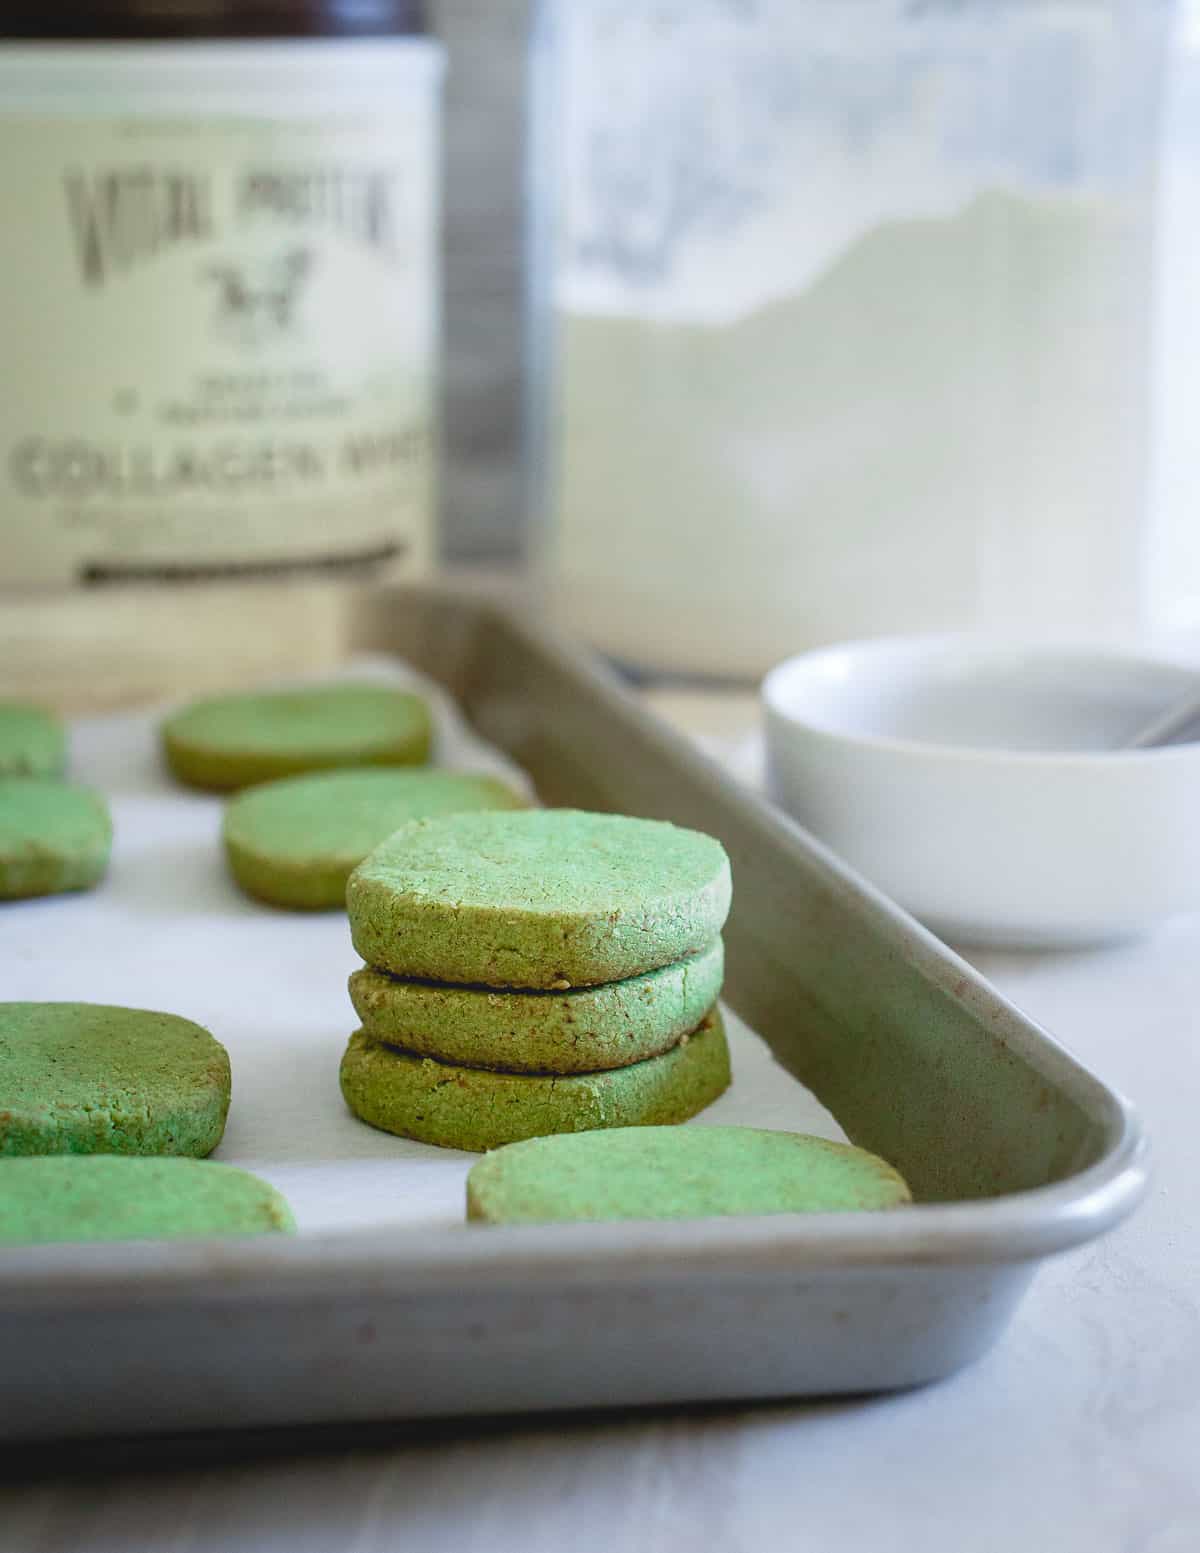 Infused with matcha green tea powder, these shortbread cookies are perfect for the holidays!